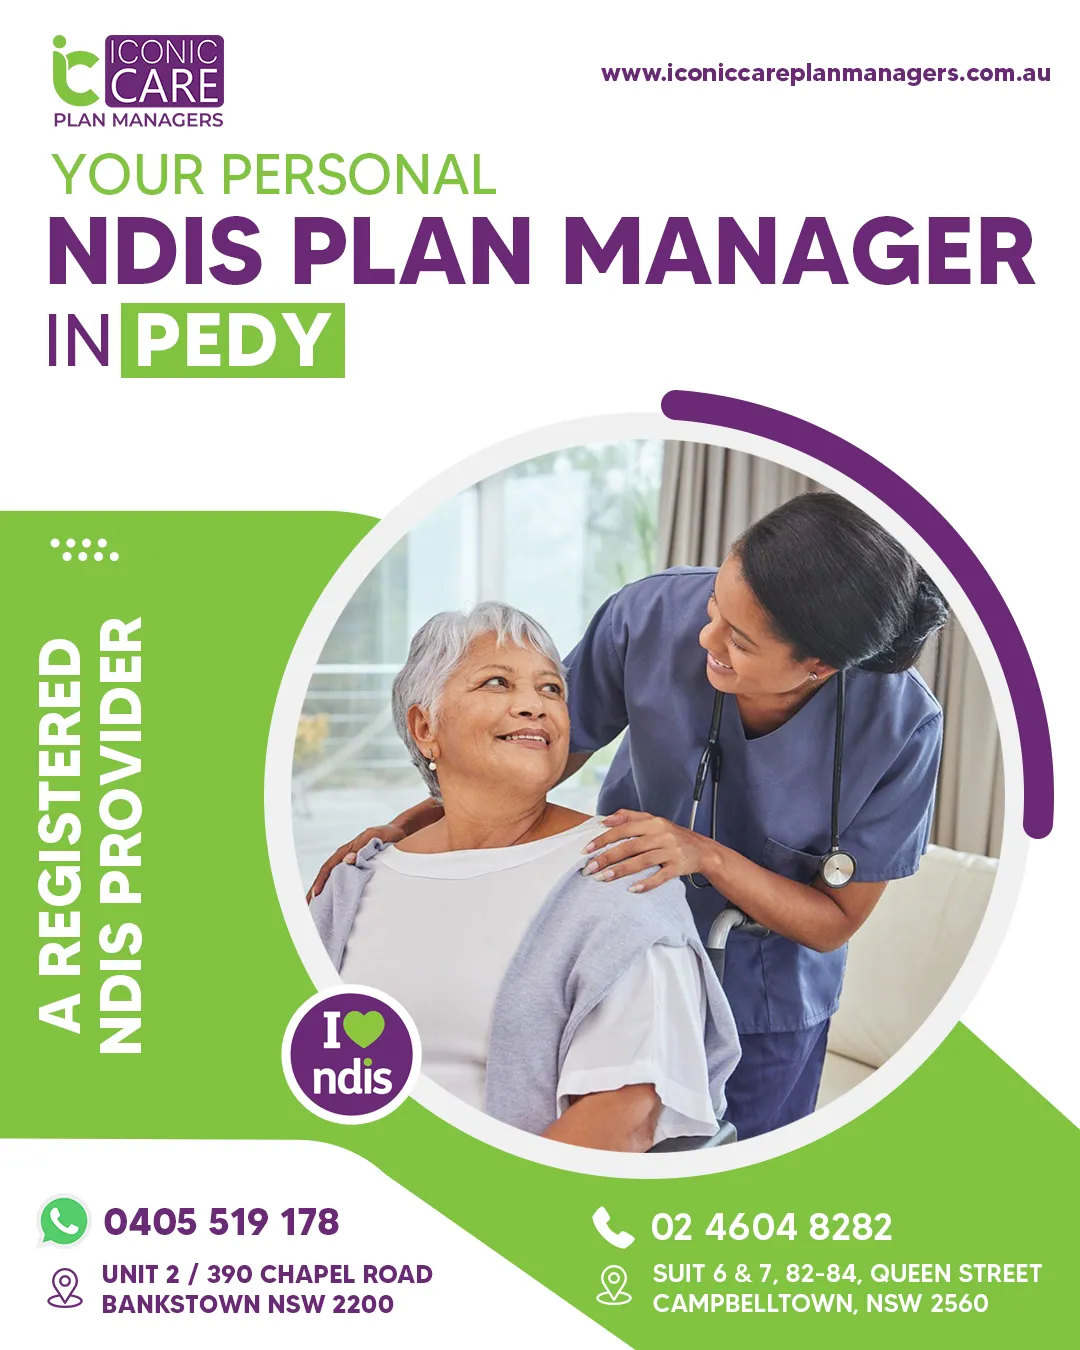 iconic care plan management is the best ndis plan managers in pedy